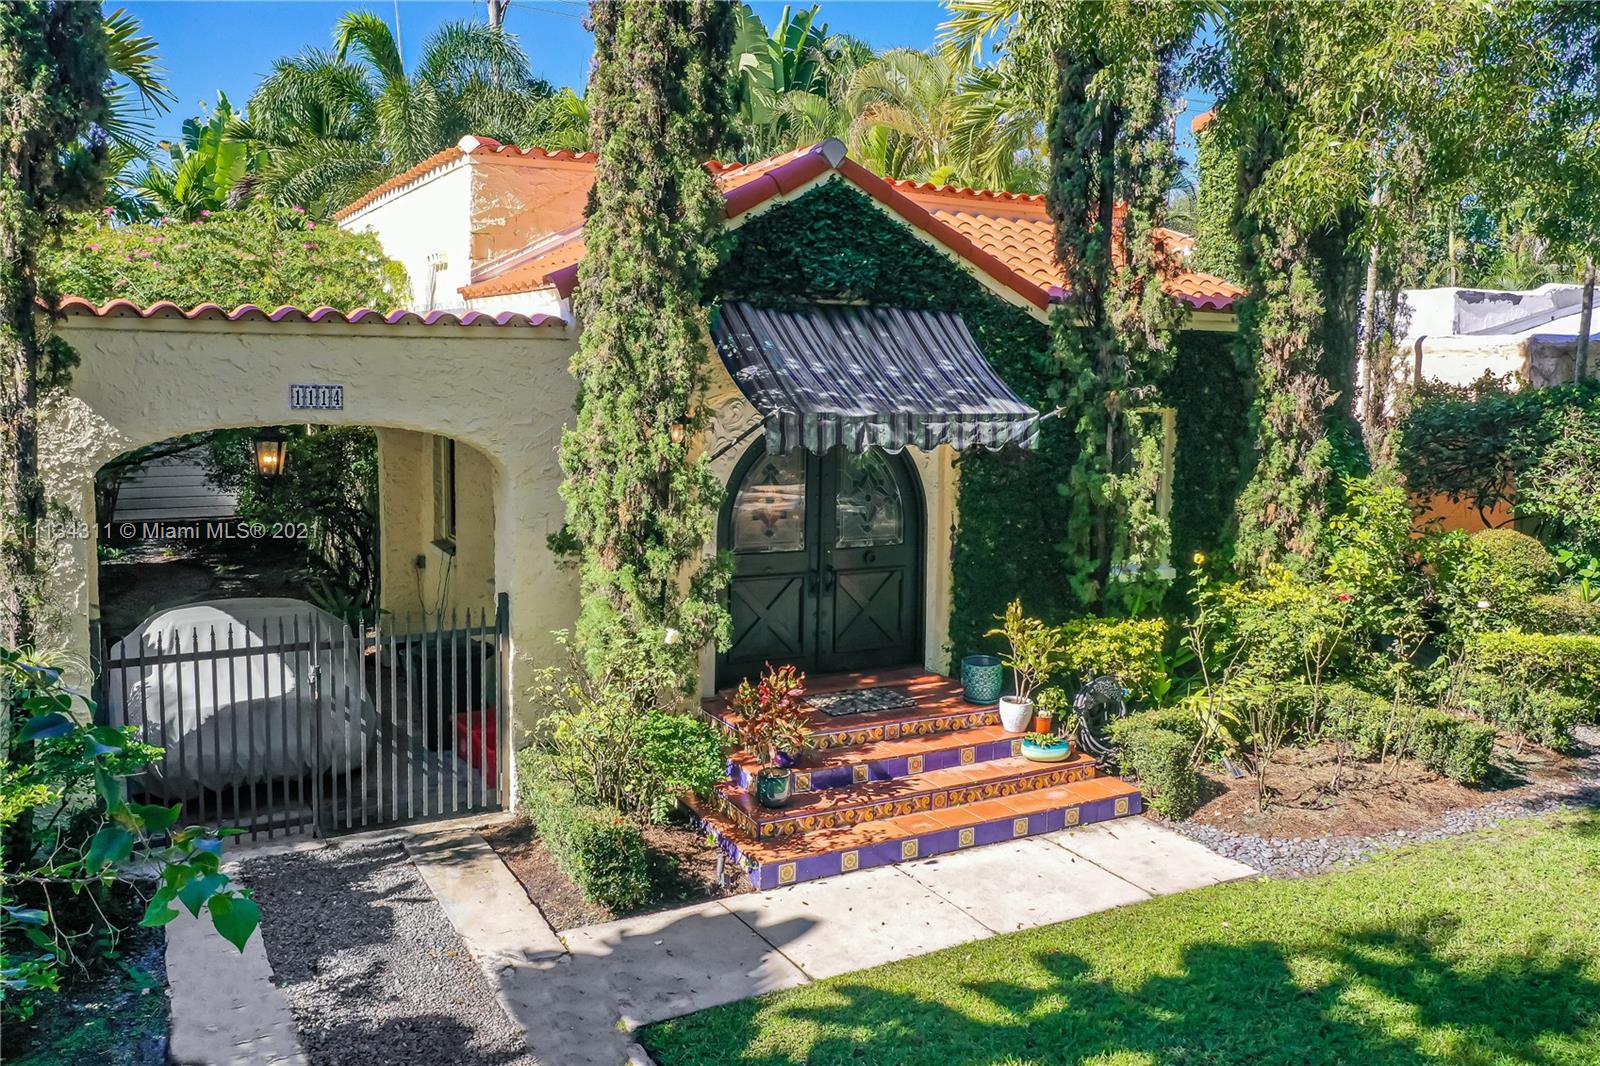 Stunning Old Spanish gem in desirable quiet neighborhood minutes from downtown Coral Gables.  Charming 2/1 in main house with open floor plan, working fireplace, hardwood floors, beautiful tiles and renovated kitchen/gas stove plus 1/1 detached guest house cottage. All new impact windows, new roof (2020), new pipes, new ducts/insulation, updated electric, new tankless water heater. Large master bedroom with oversized closet and high ceilings. Cozy garden with old Chicago brick pavers perfect for outdoor entertaining. Washer/Dryer area off from kitchen. Completely move-in ready!